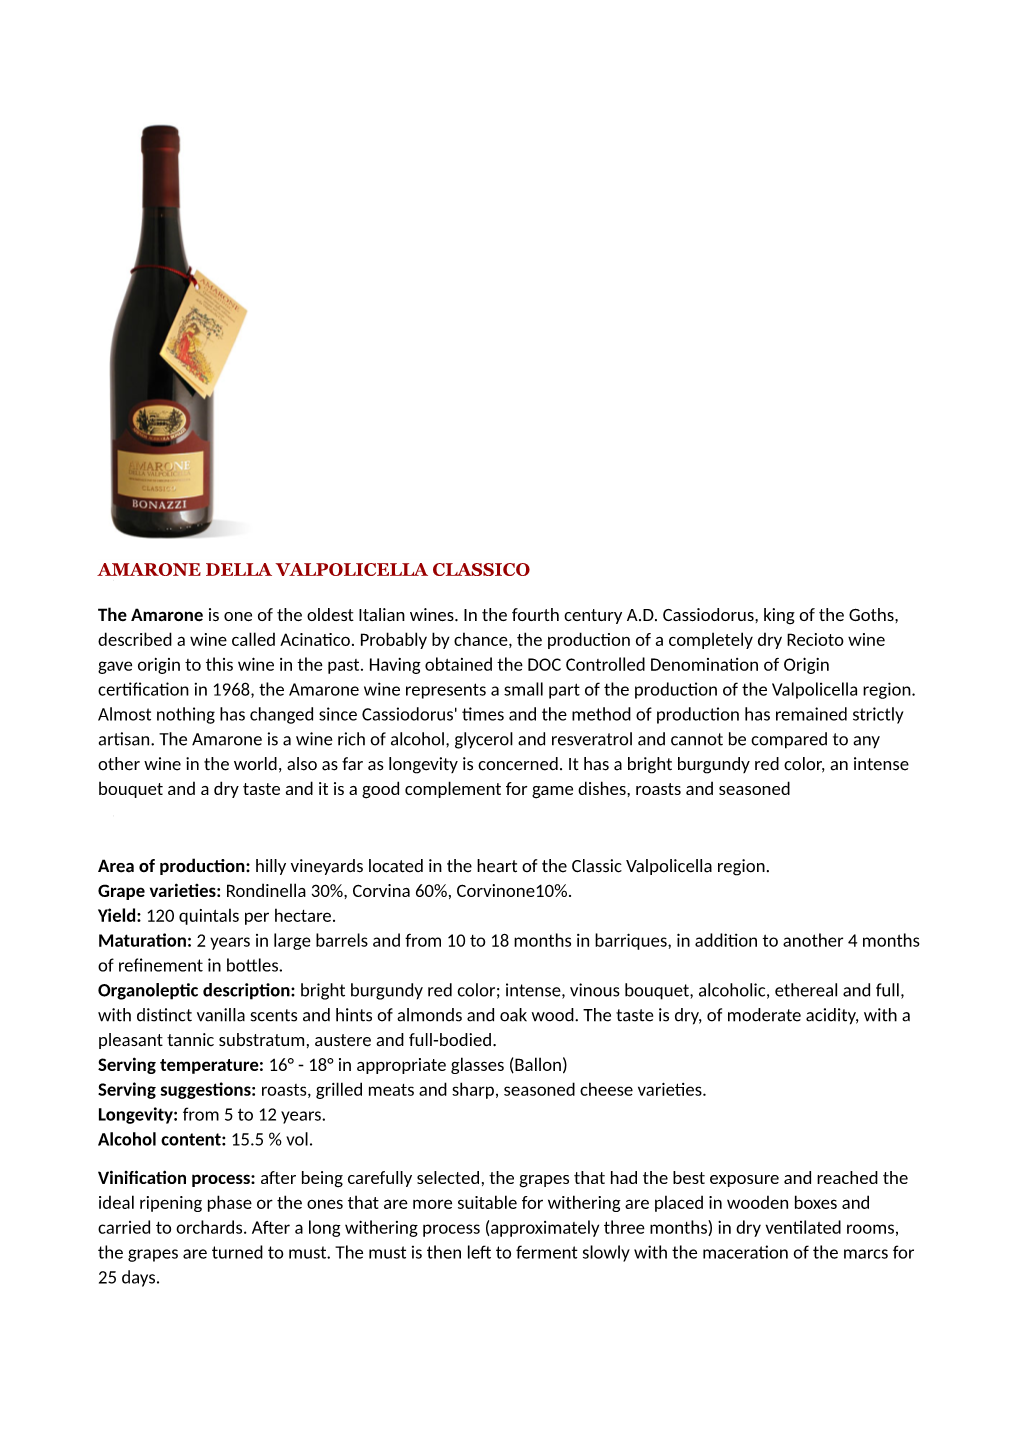 The Amarone Is One of the Oldest Italian Wines. in the Fourth Century A.D